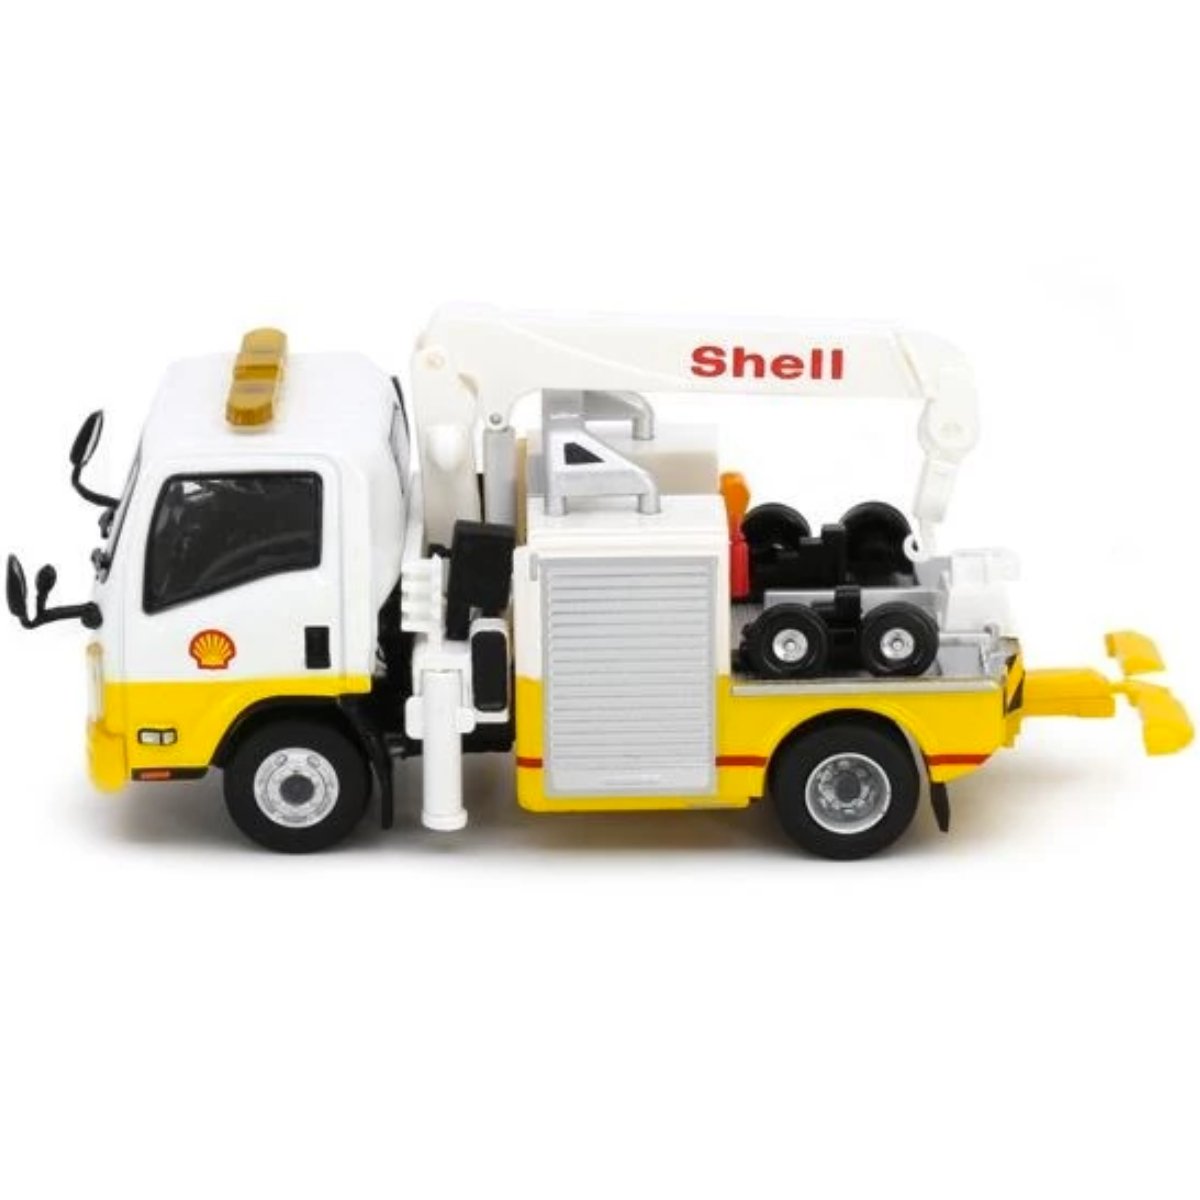 Tiny Models Isuzu N Series Shell Tow Truck (1:64 Scale) - Phillips Hobbies